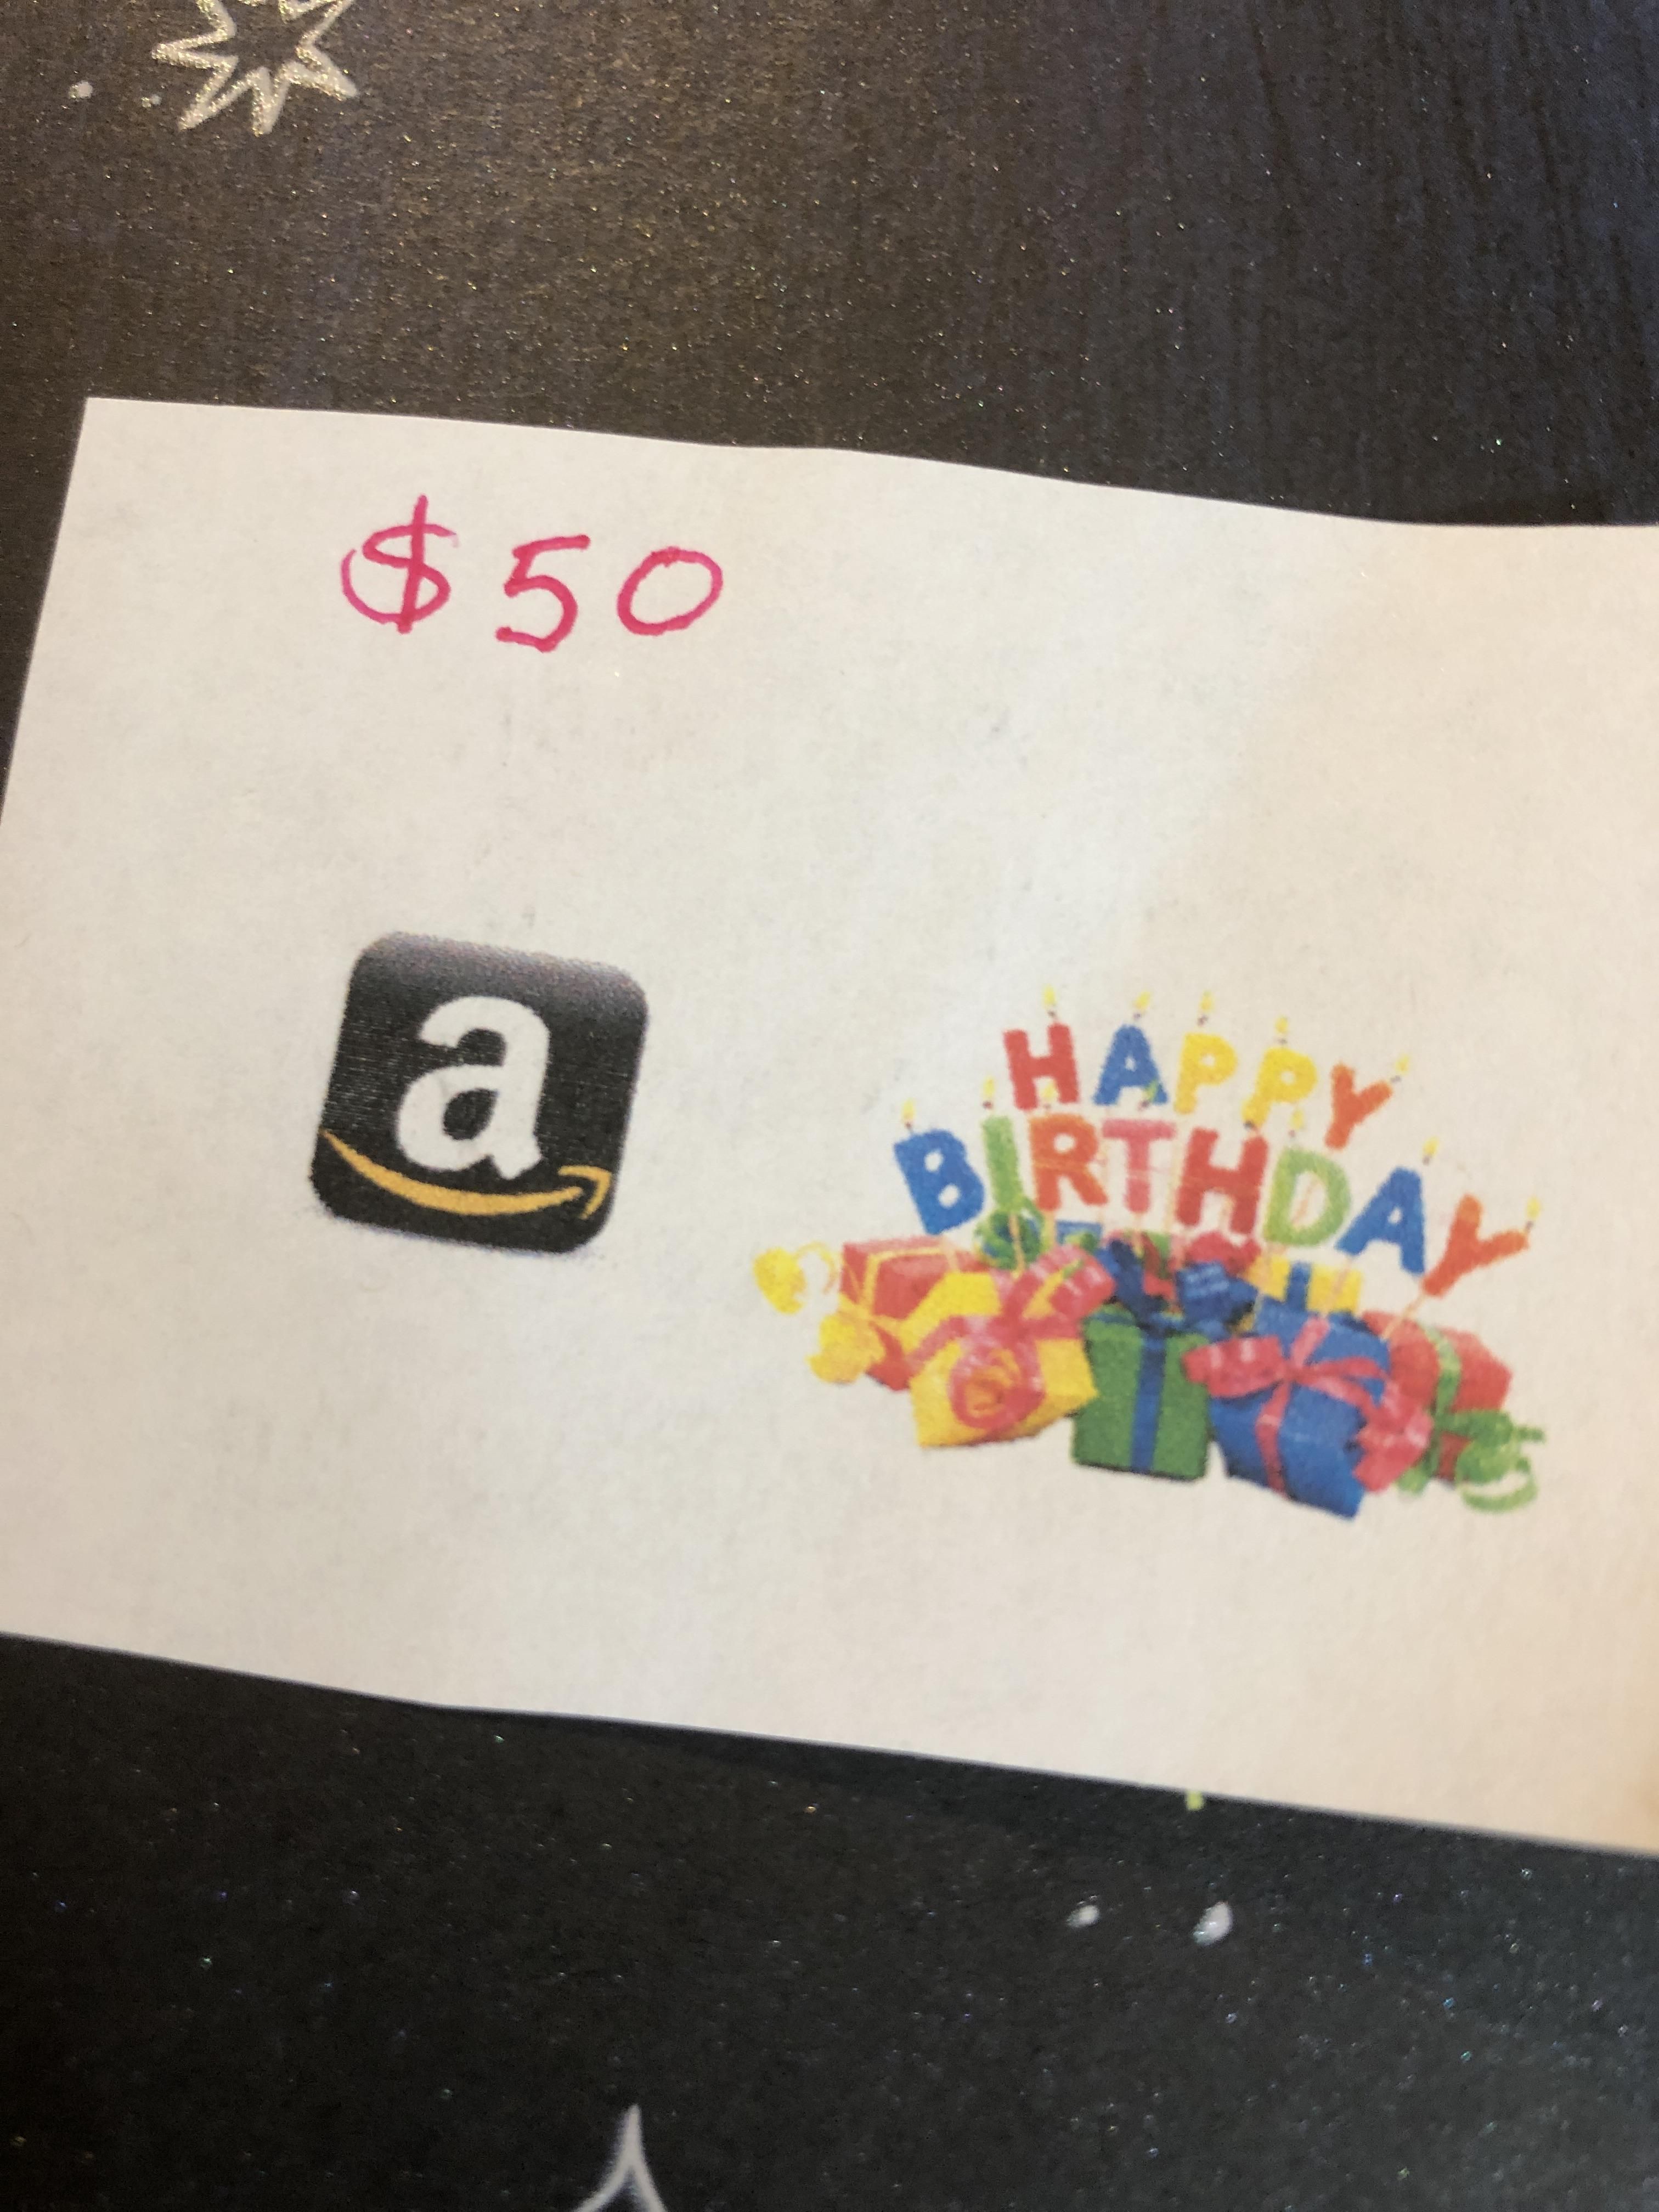 I don’t think my grandma knows how gift cards work